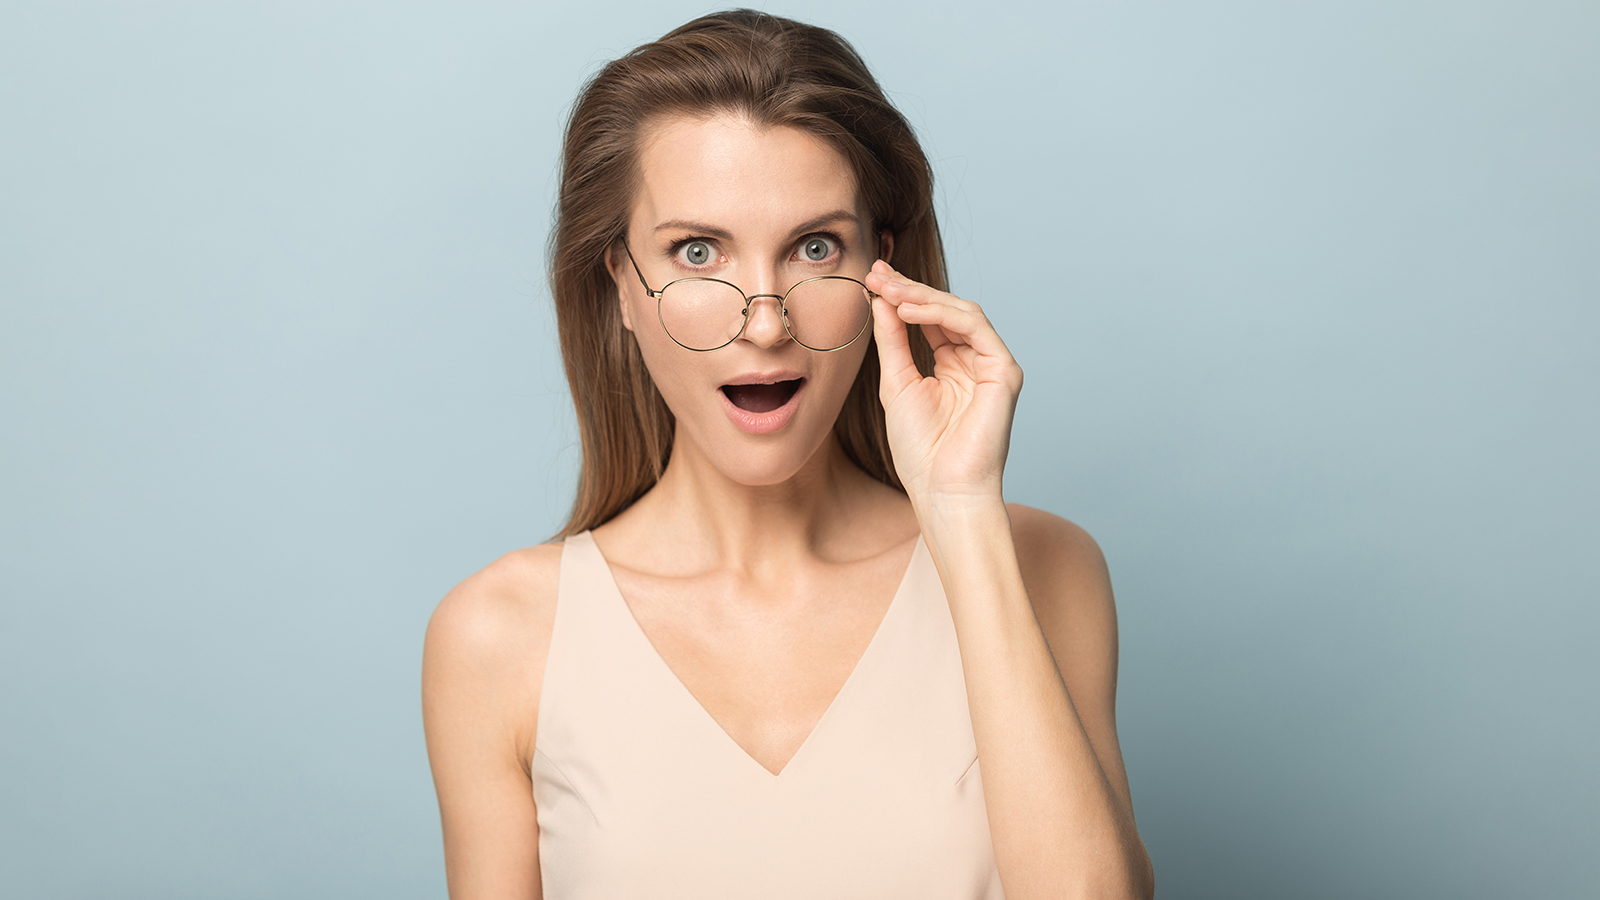 Surprised woman with open mouth in disbelief taking off glasses, hearing unexpected good news, astonished amazed female with wide open eyes looking at camera, isolated on studio background